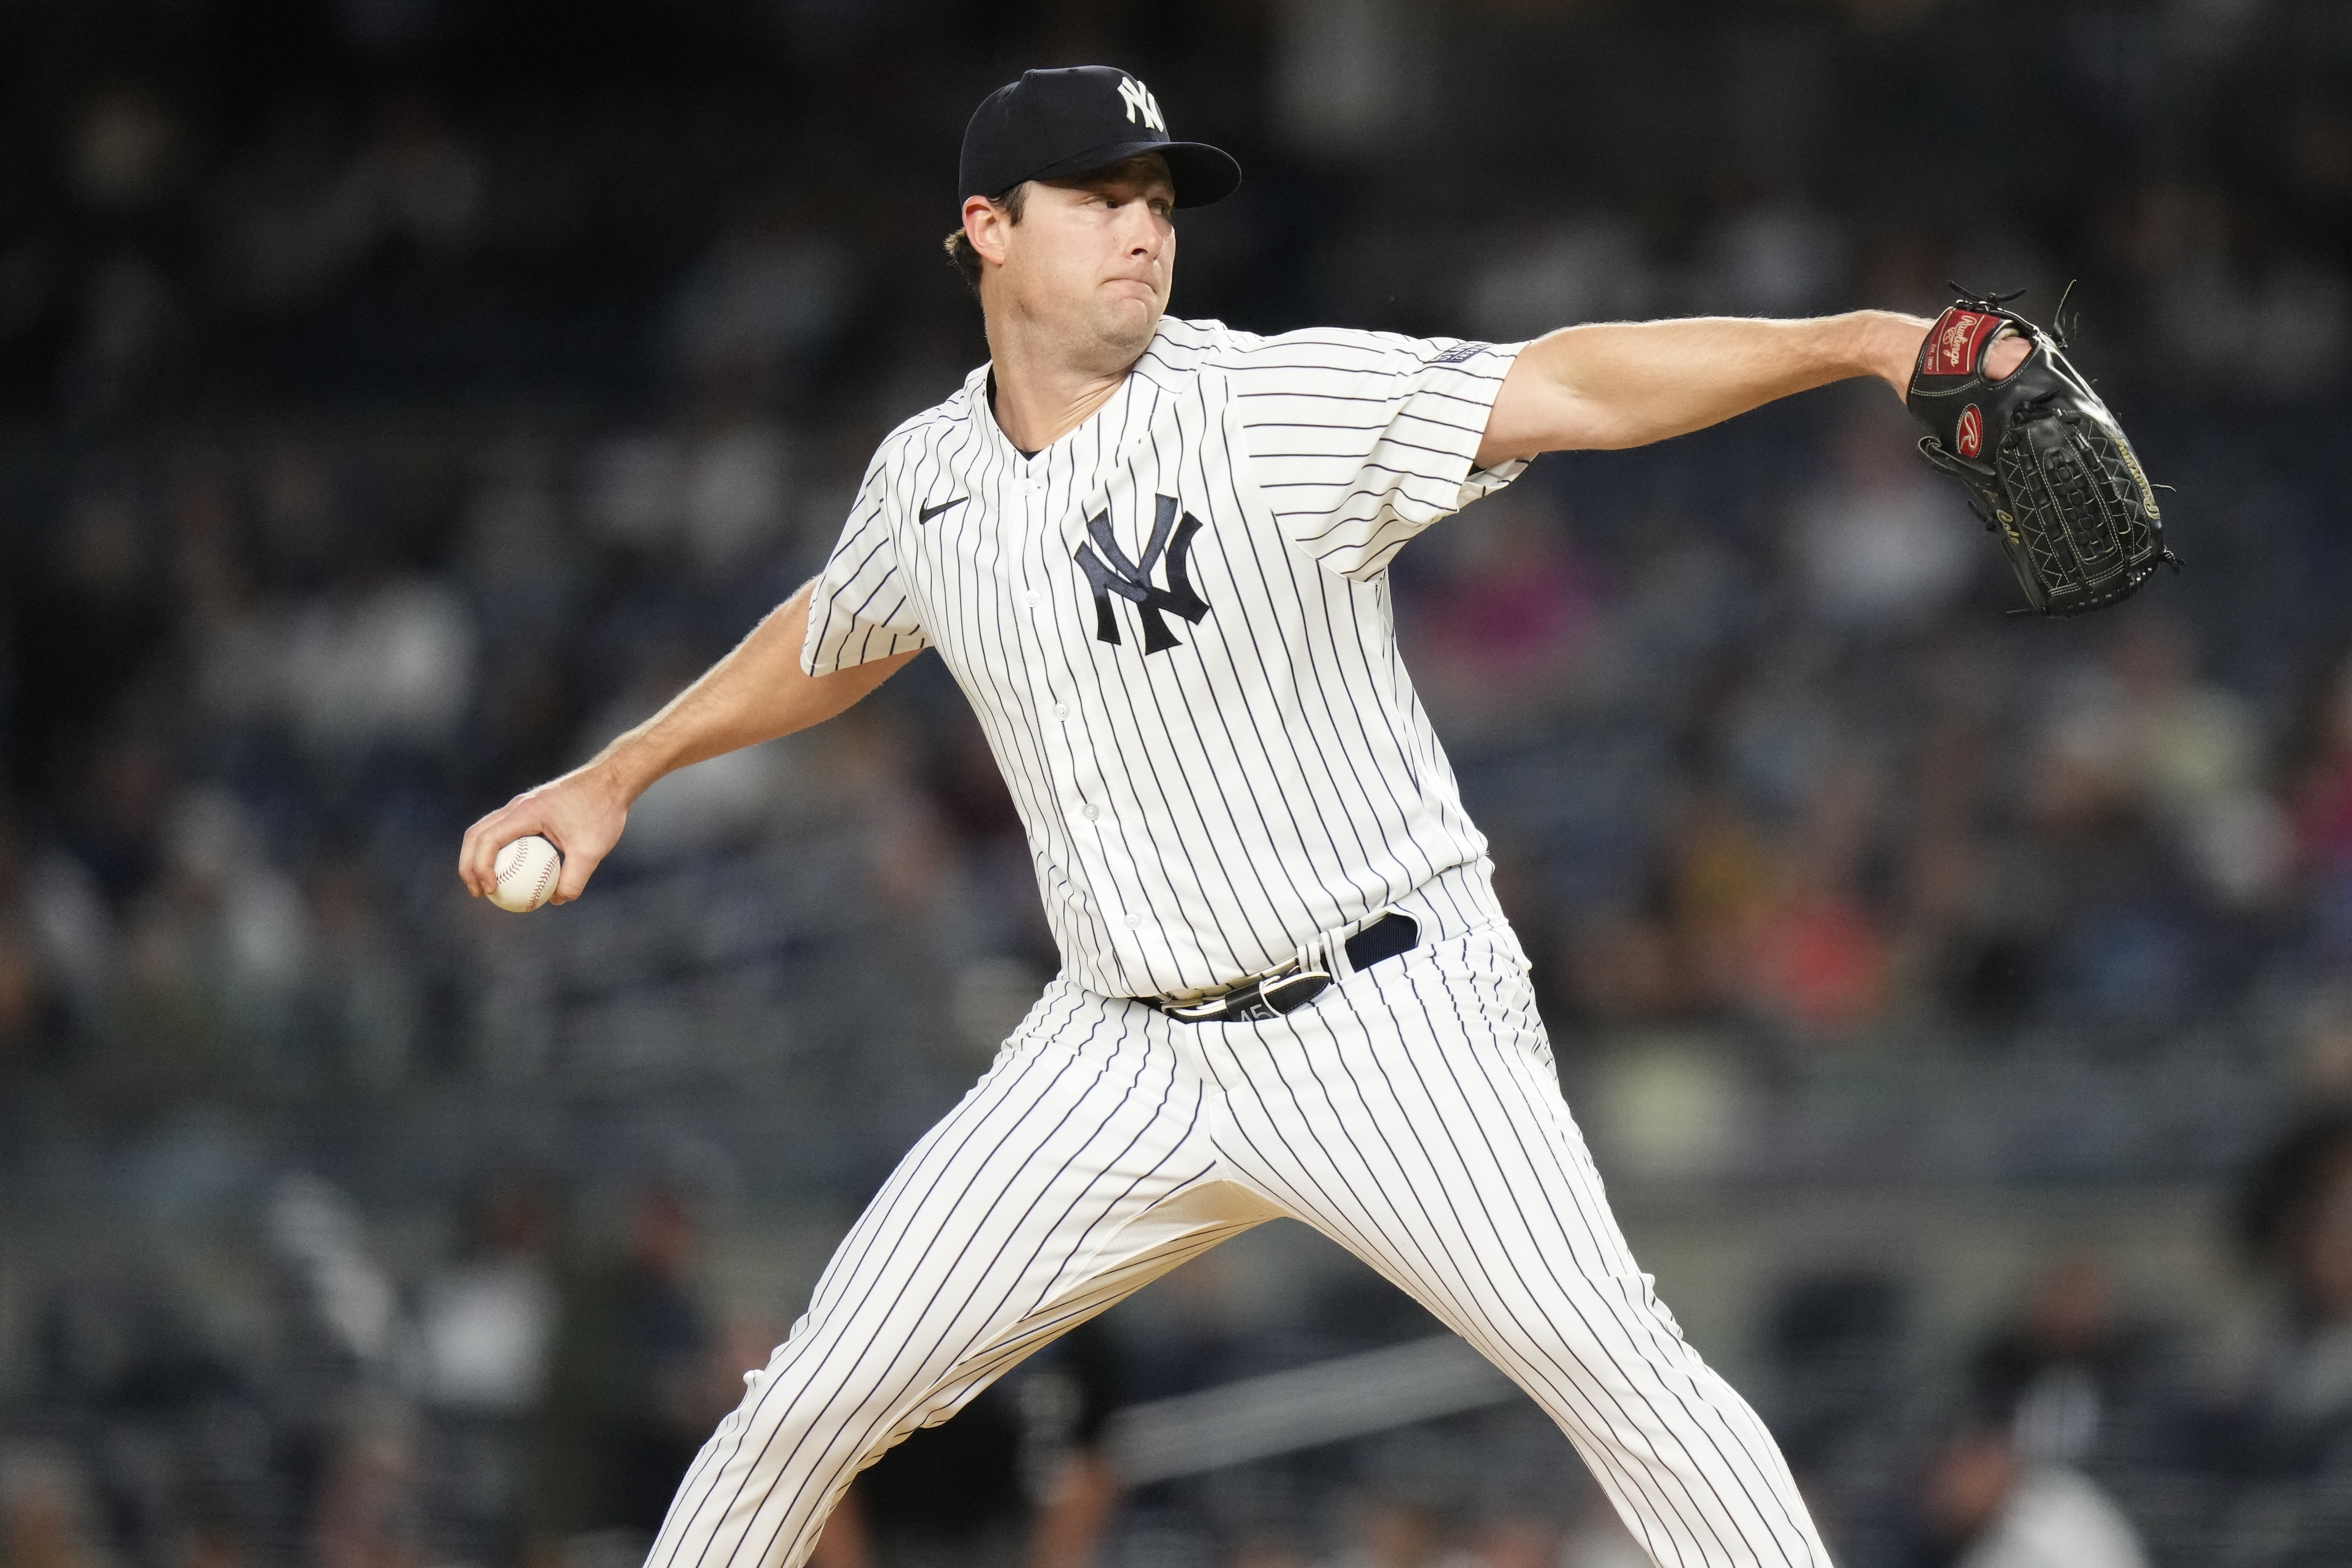 Gerrit Cole (Cy Young lock) deserved better than Yankees' dark October